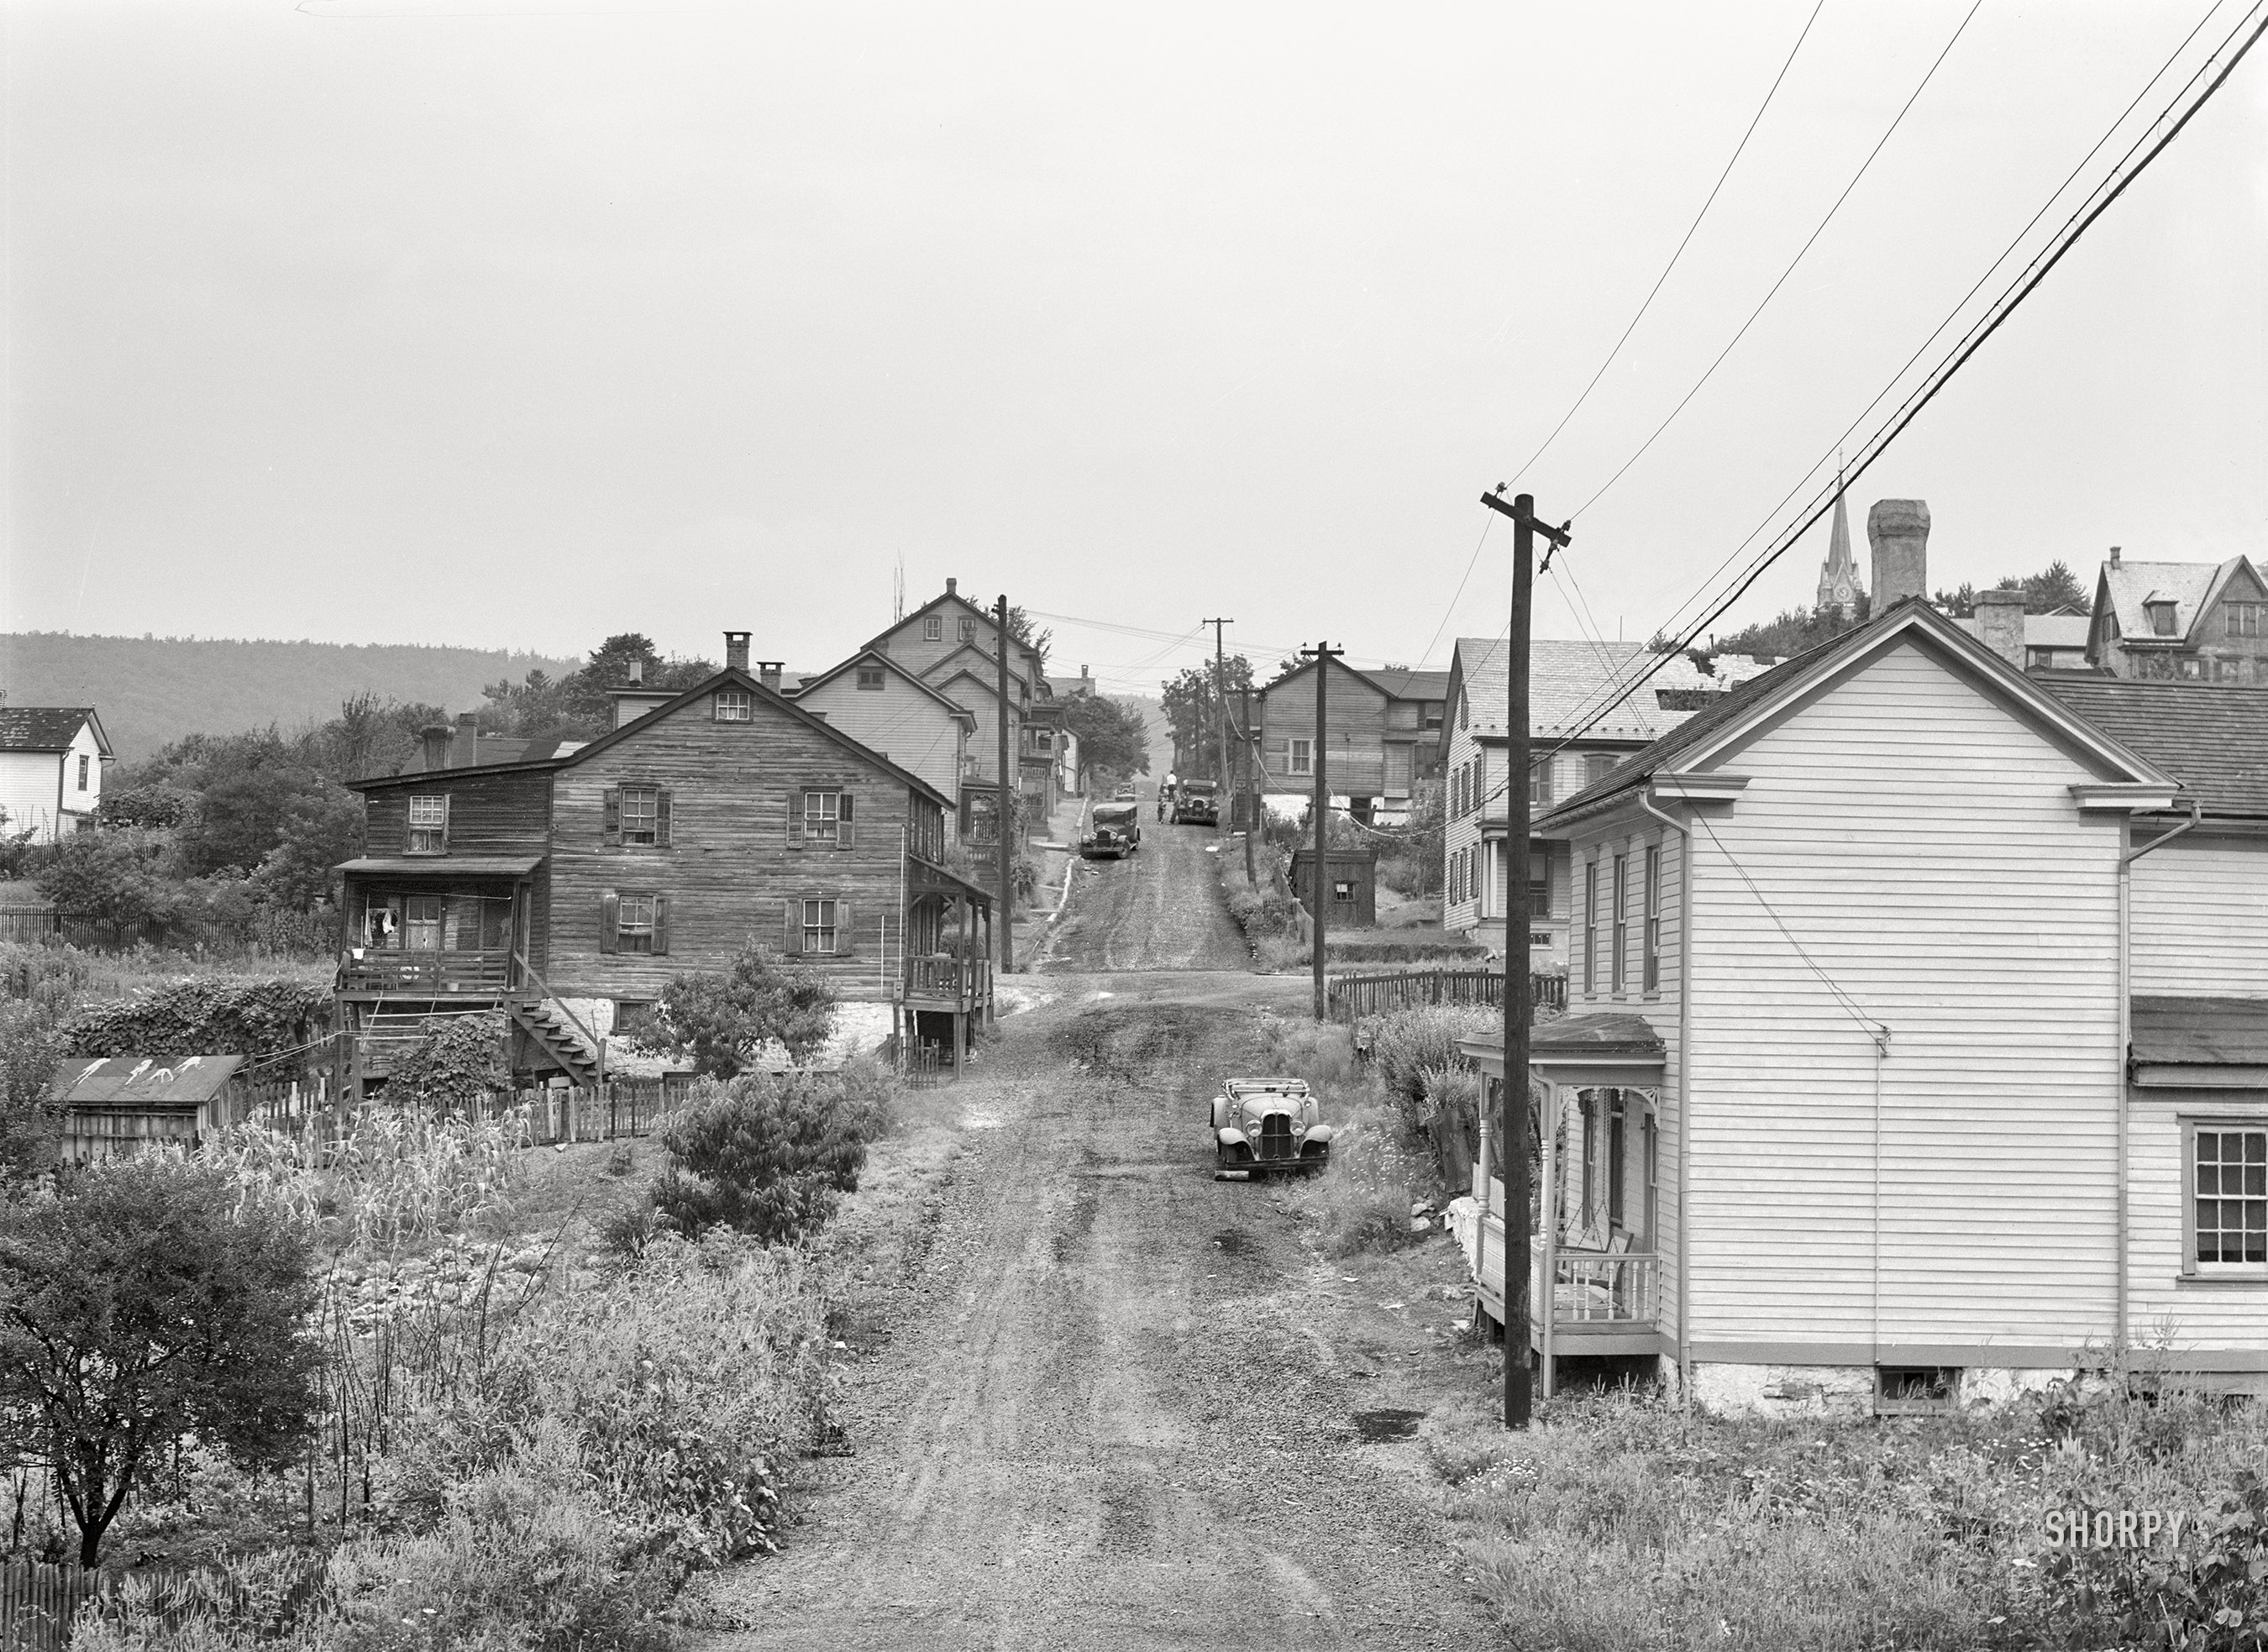 August 1940. "Mauch Chunk, Pennsylvania. Small historic coal mining town in the Lehigh Valley. Houses in East Mauch Chunk." Acetate negative by Jack Delano. View full size.